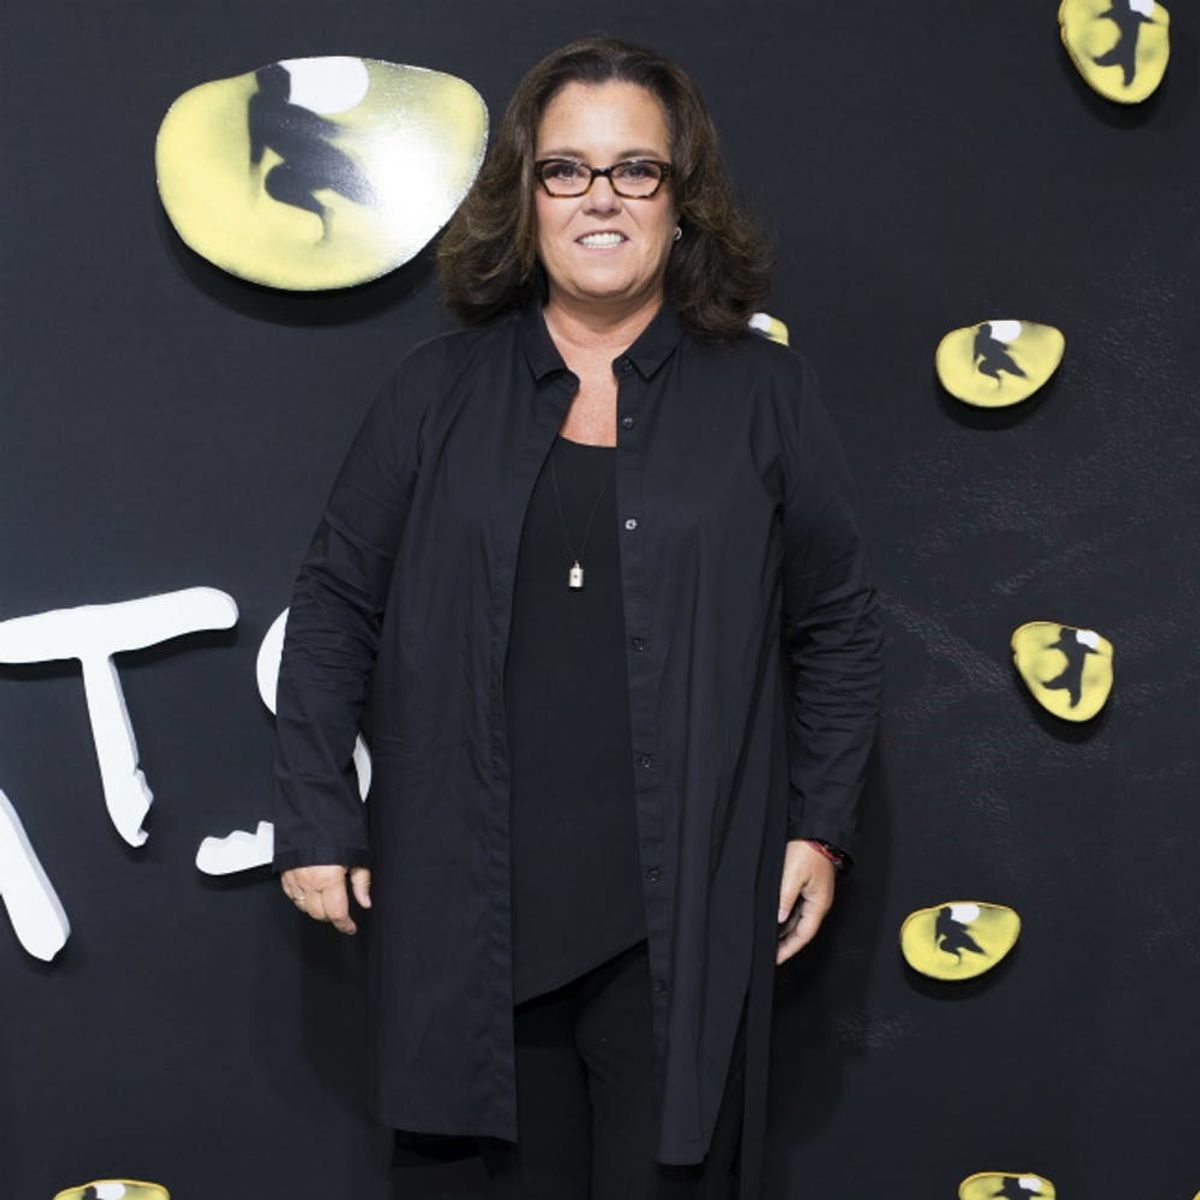 Twitter Wants Rosie O’Donnell to Play Steve Bannon on SNL